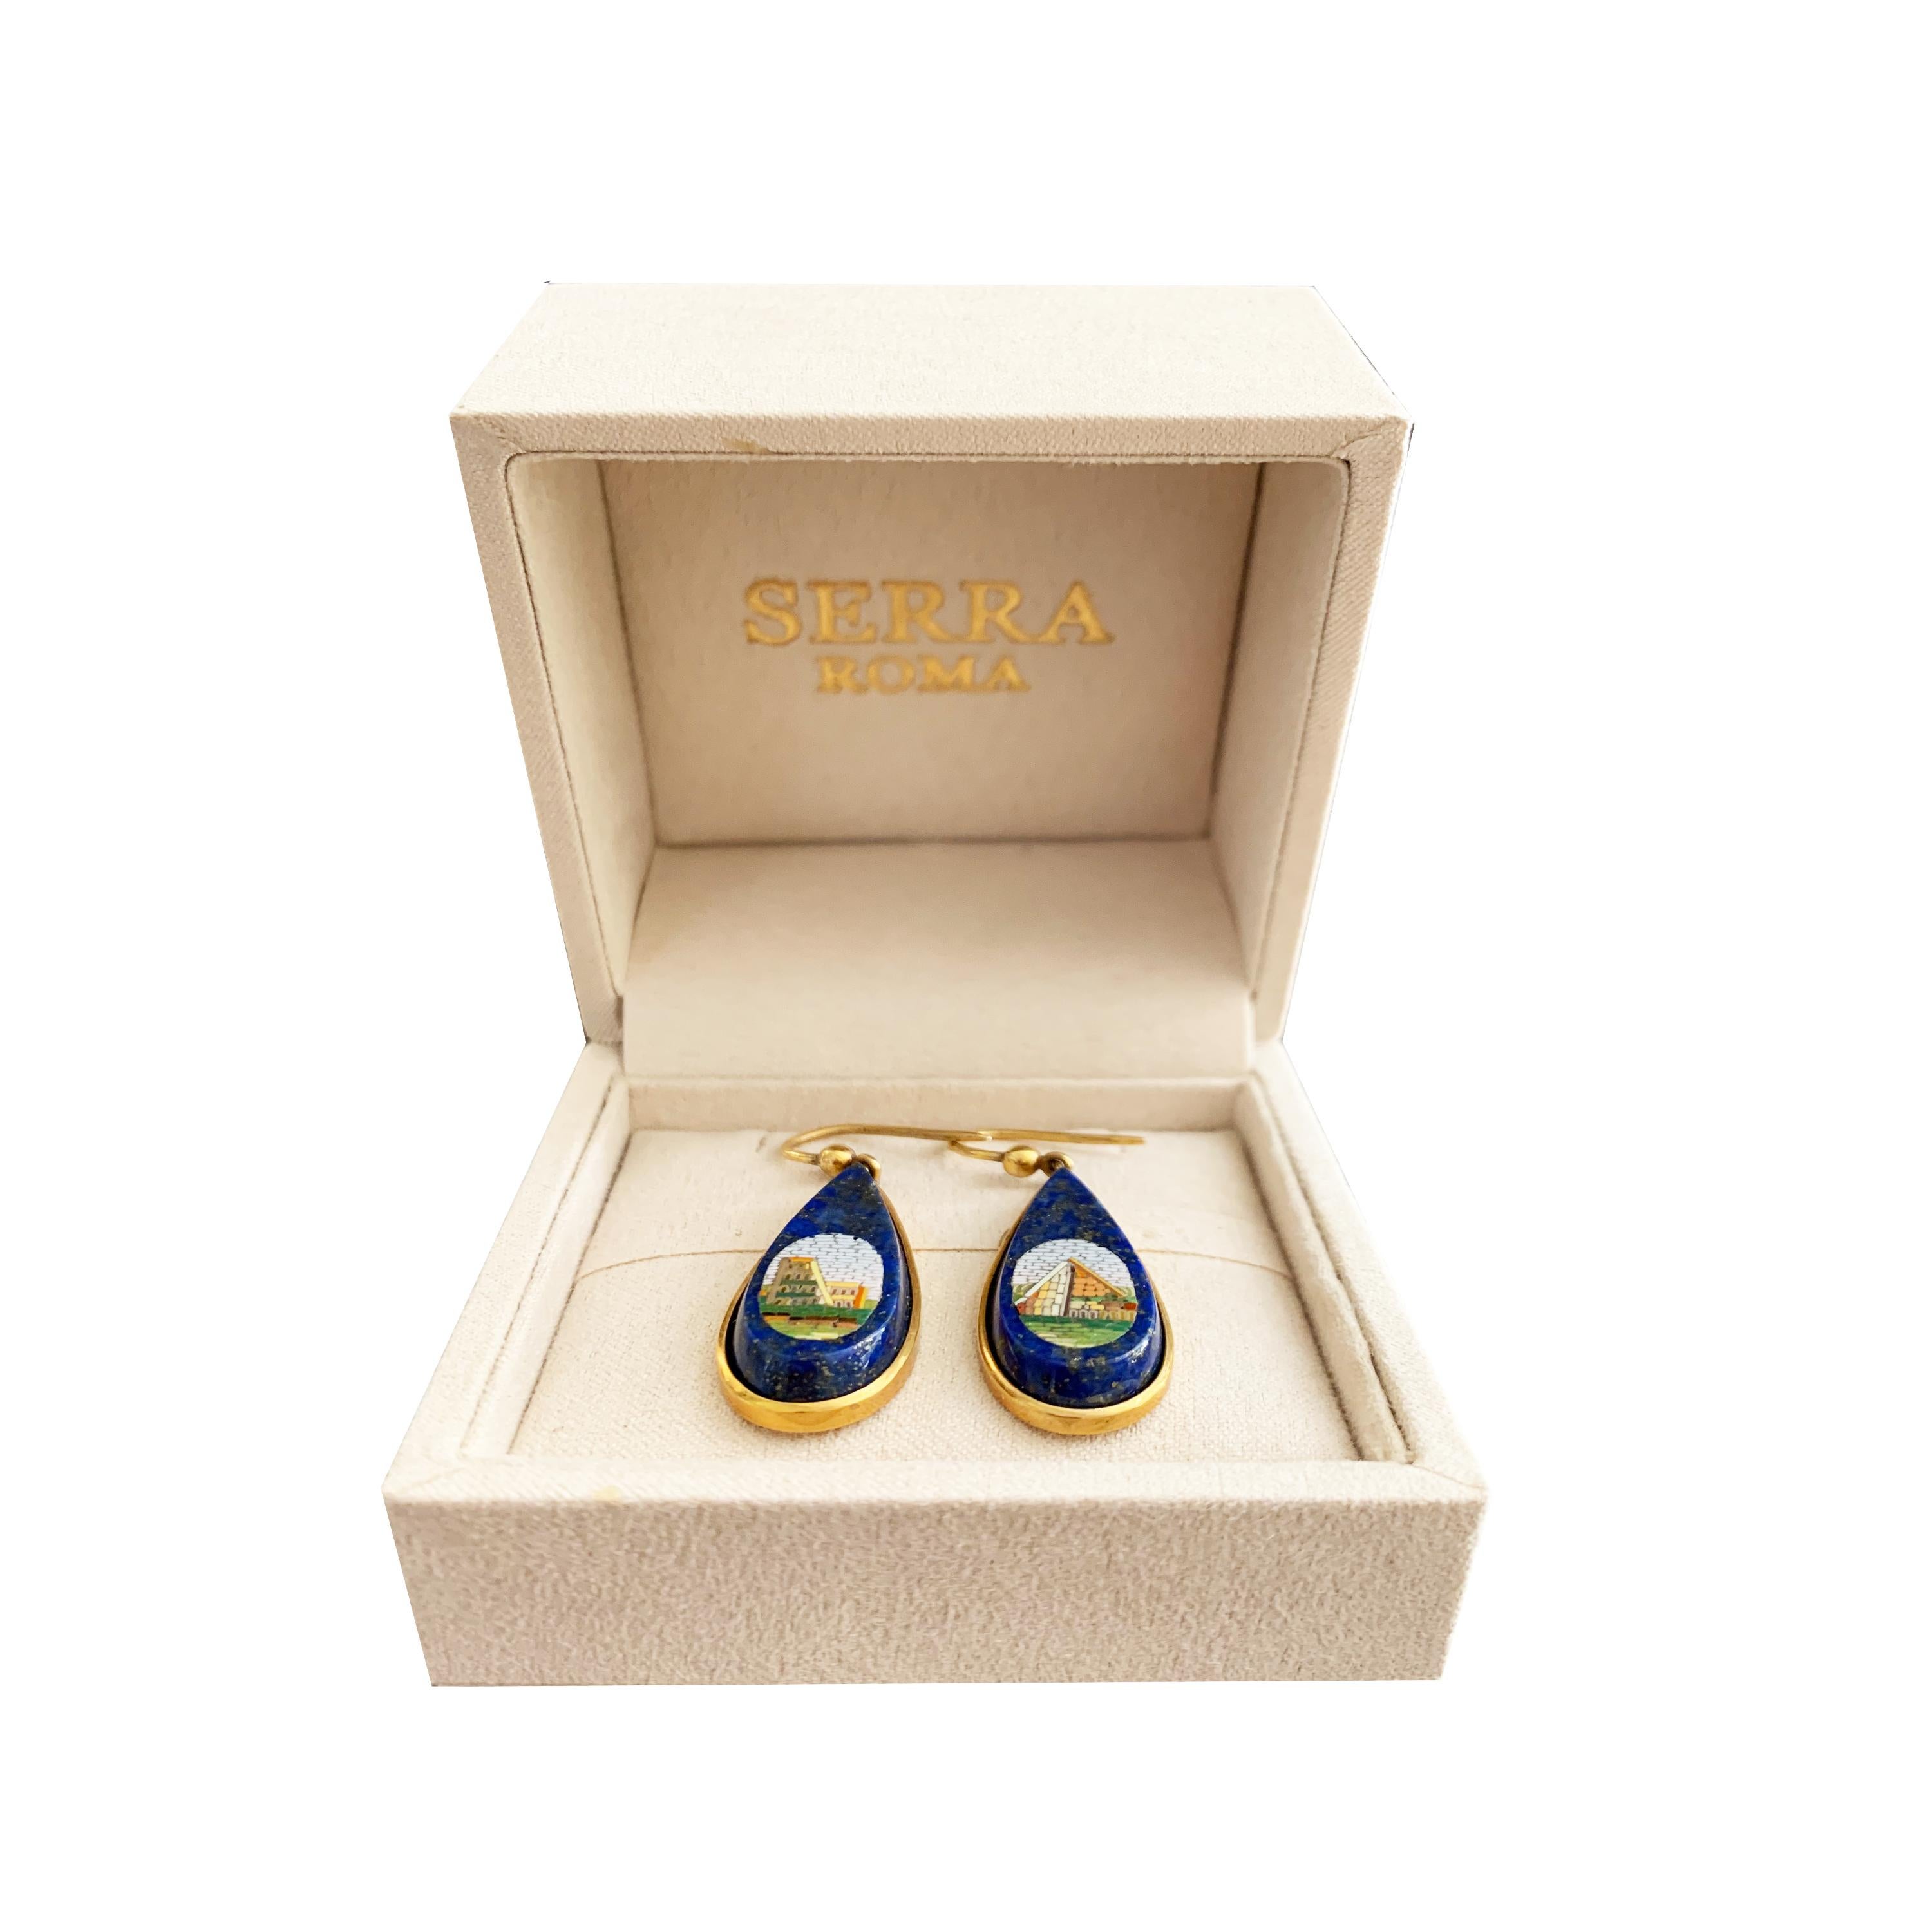 These gold, lapis lazuli and micromosaic earrings (mid 19th century) depict two Roman monuments : the Cestius Pyramid and the Colosseum ! They come from the Vatican Mosaic Studio that started up in 1727. Here the best mosaic artists that Rome